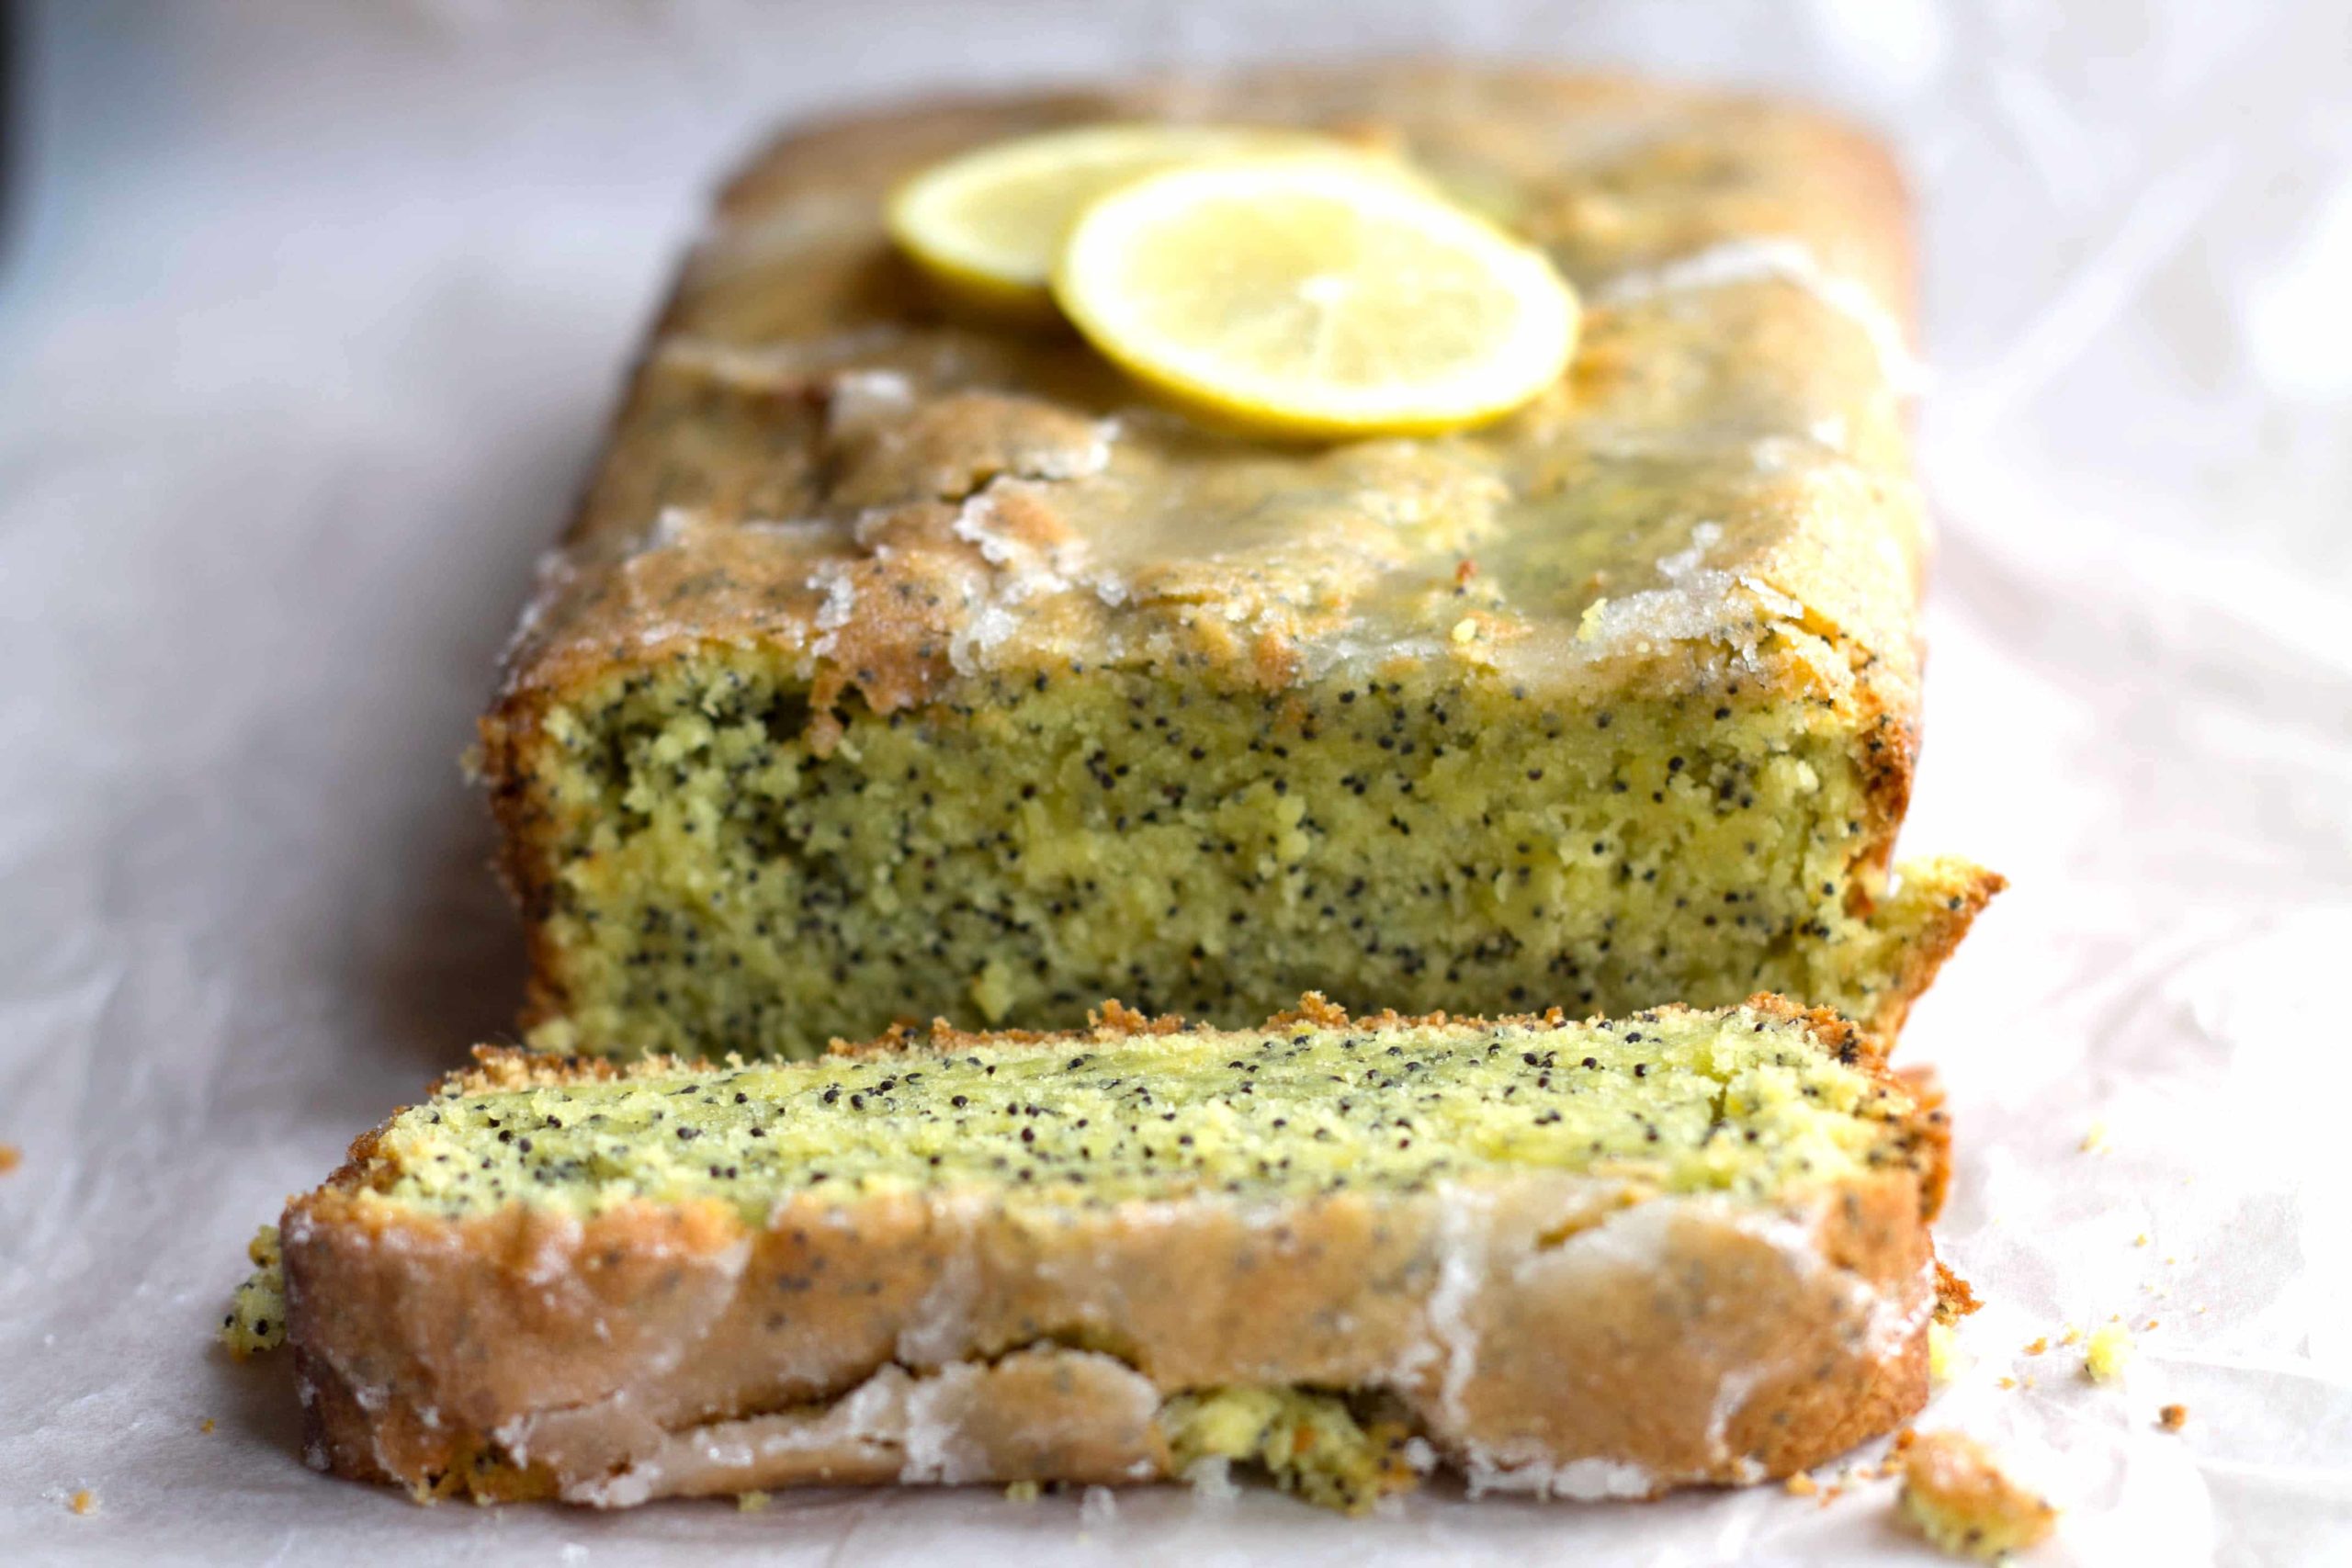 Lemon Poppy Seed Drizzle Cake - Erren's Kitchen - Lemon Drizzle Cake is a classic English recipe. Poppy seeds add a bit of a twist to this classic citrus cake with a crunchy sugar topping and moist texture.